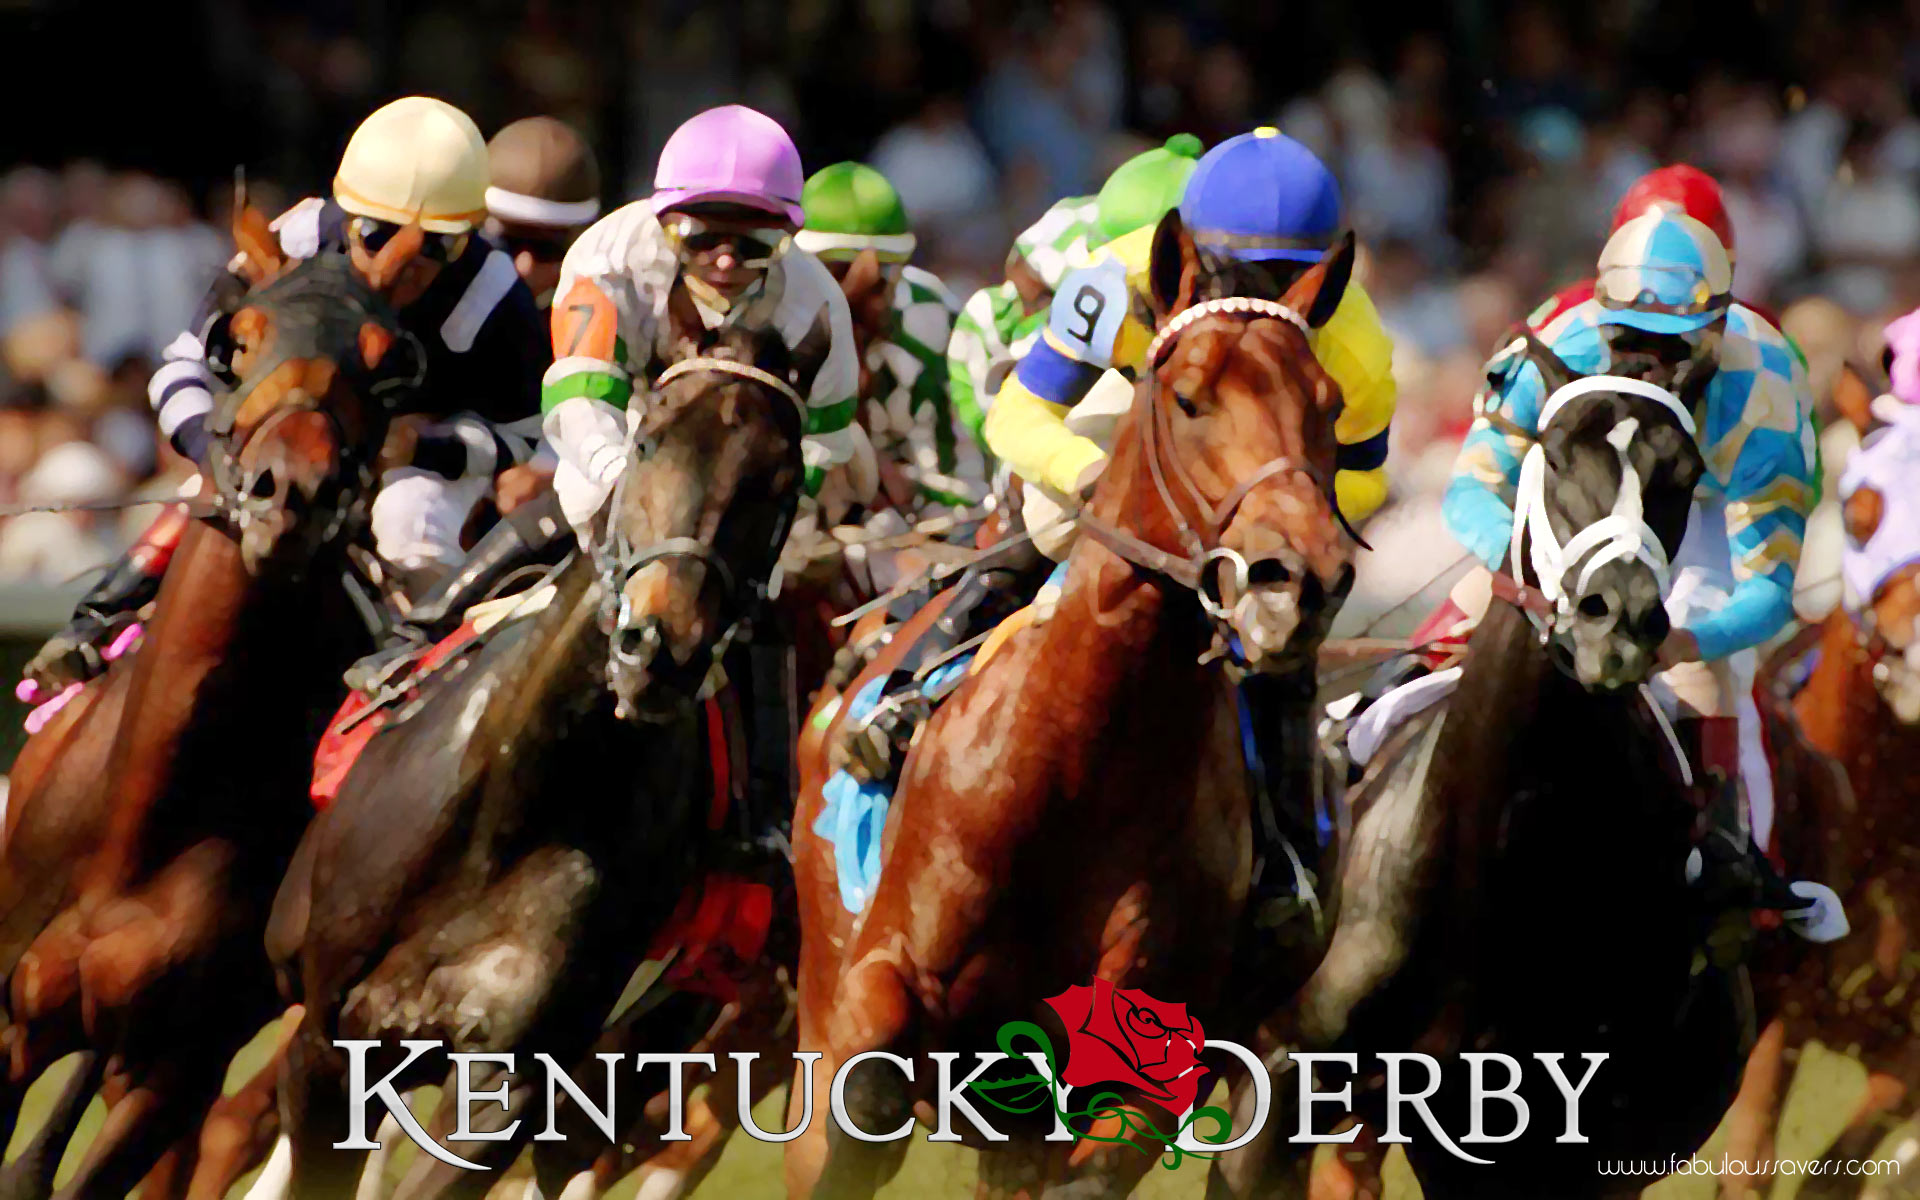  Roses Kentucky Derby computer desktop wallpapers pictures images 1920x1200